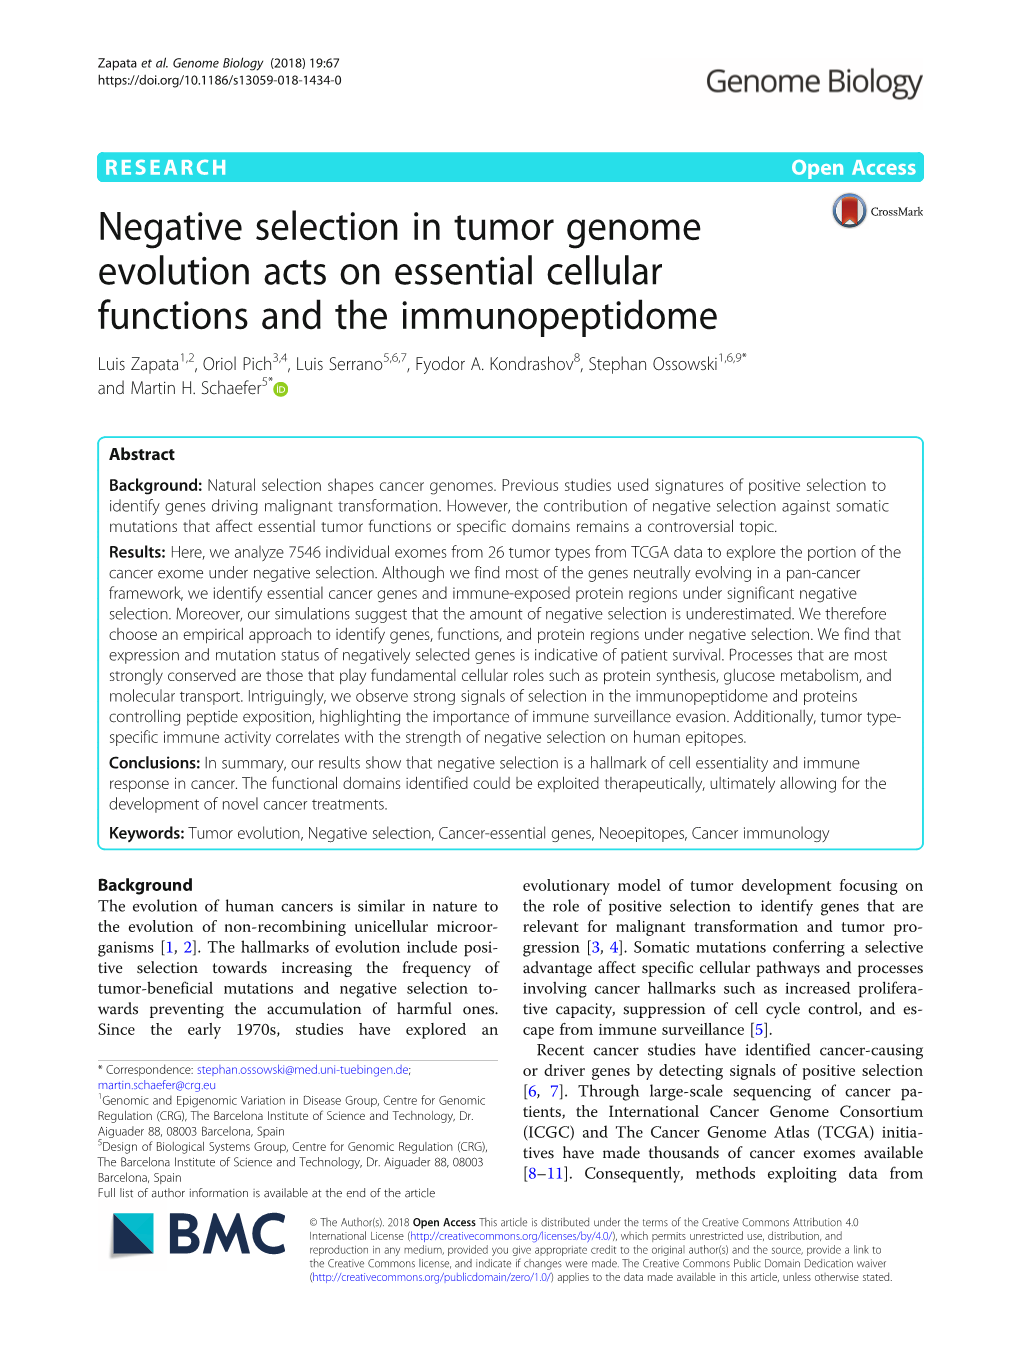 Negative Selection in Tumor Genome Evolution Acts on Essential Cellular Functions and the Immunopeptidome Luis Zapata1,2, Oriol Pich3,4, Luis Serrano5,6,7, Fyodor A